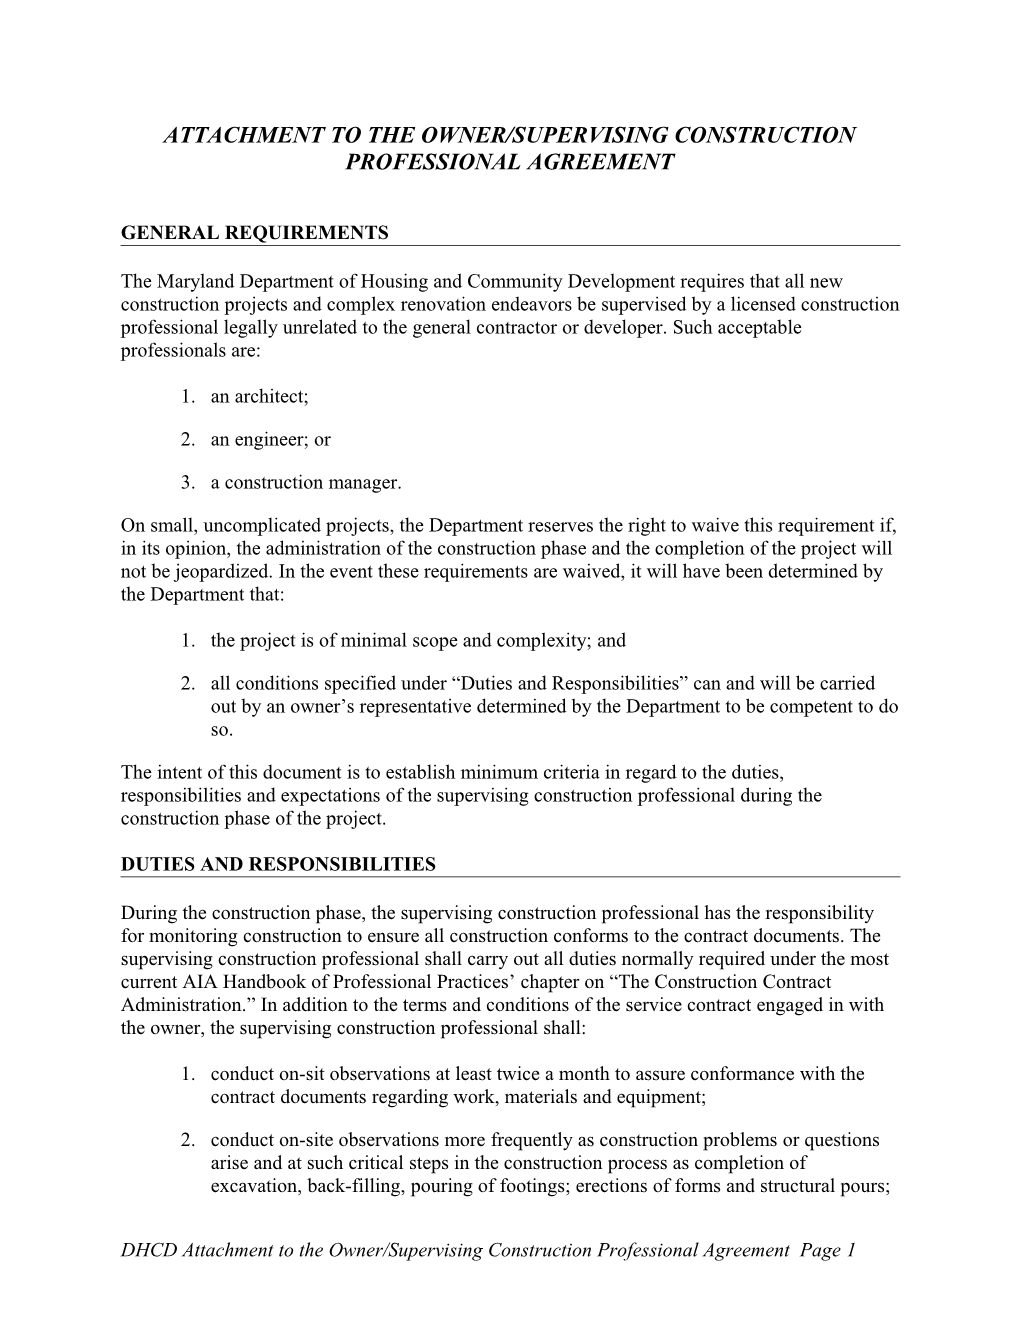 Attachment to the Owner/Supervising Construction Professional Agreement